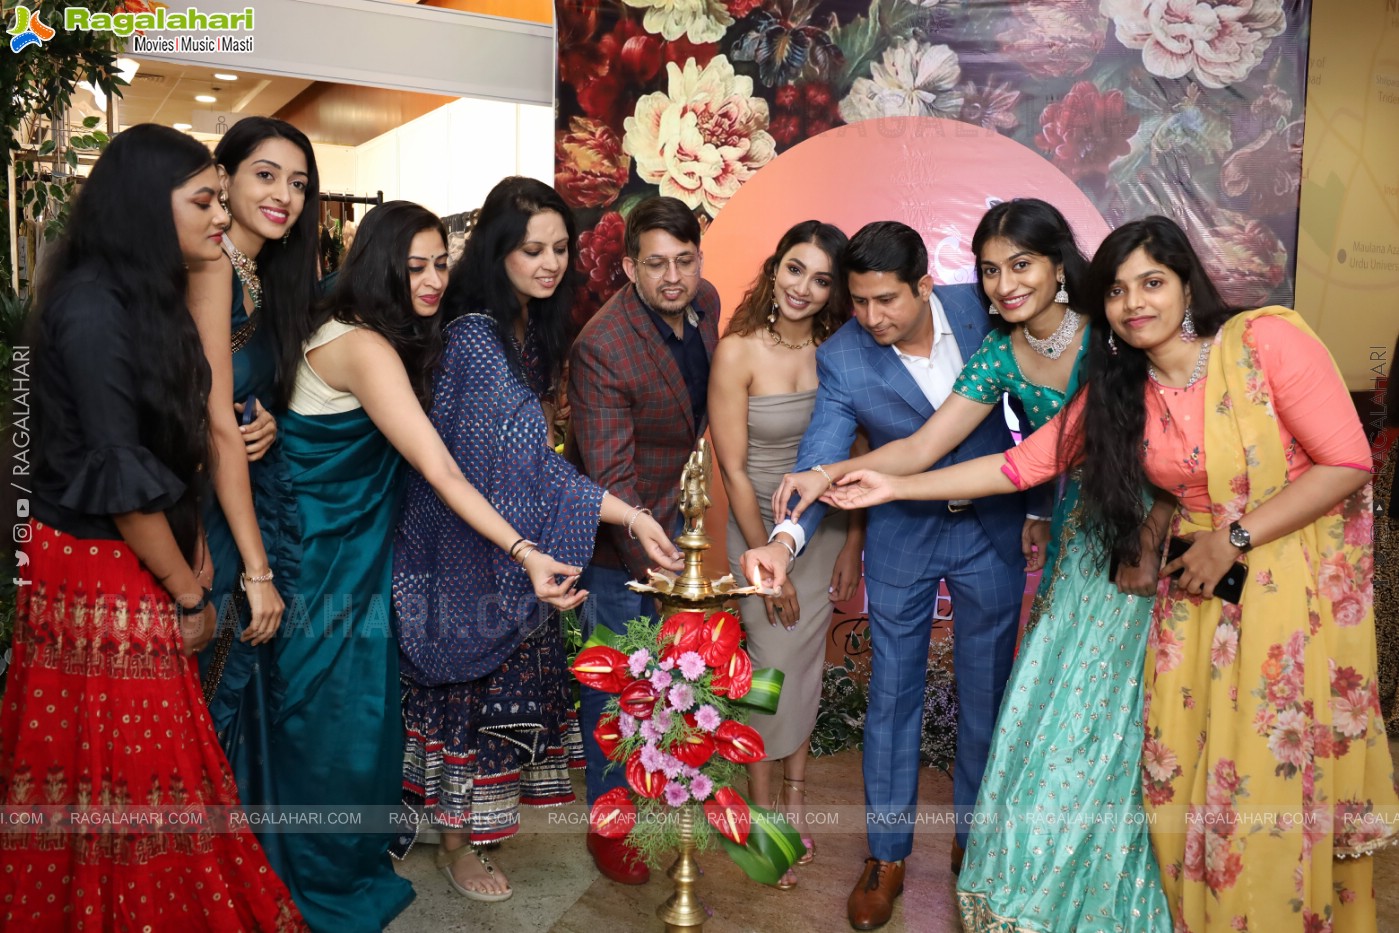 Sutraa Fashion Exhibition Inaugurated by Actress Tejaswi Madiwada at HICC-Novotel